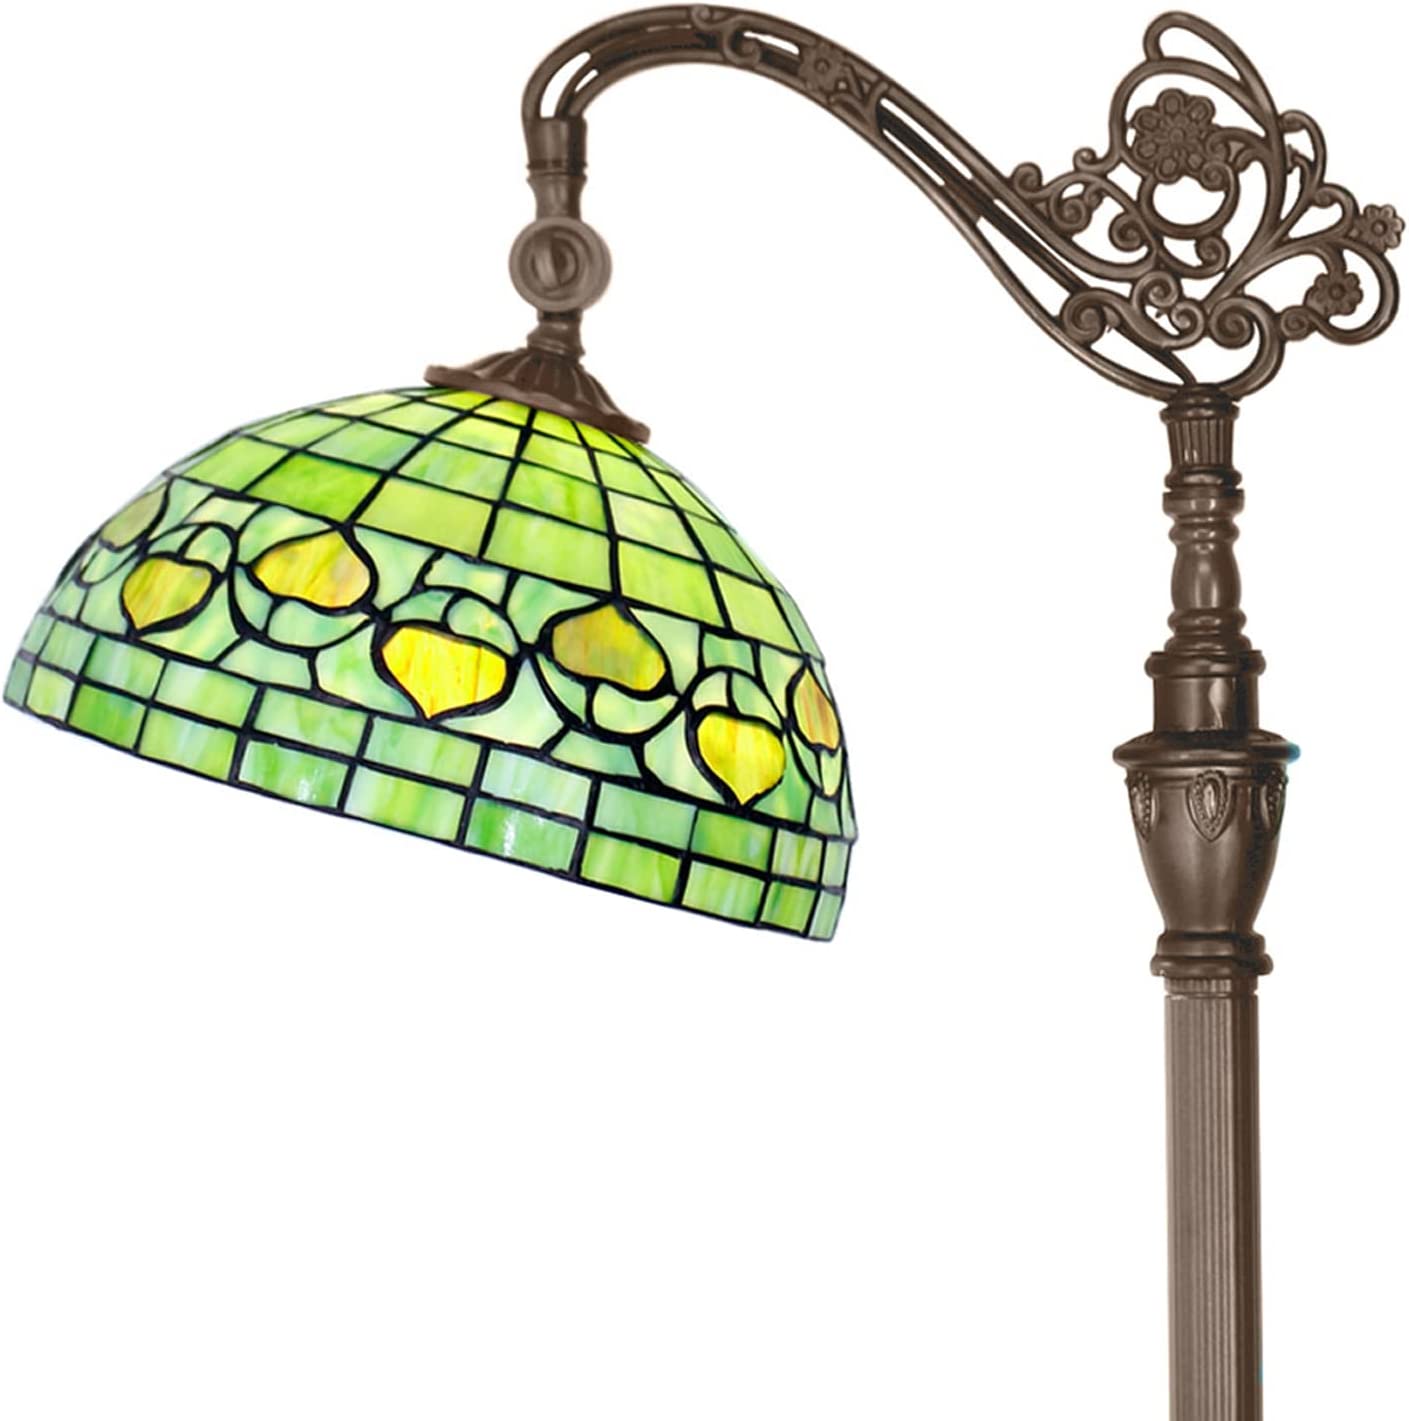 Werfactory® Tiffany Floor Lamp Green Stained Glass Apple Arched Gooseneck Reading Light